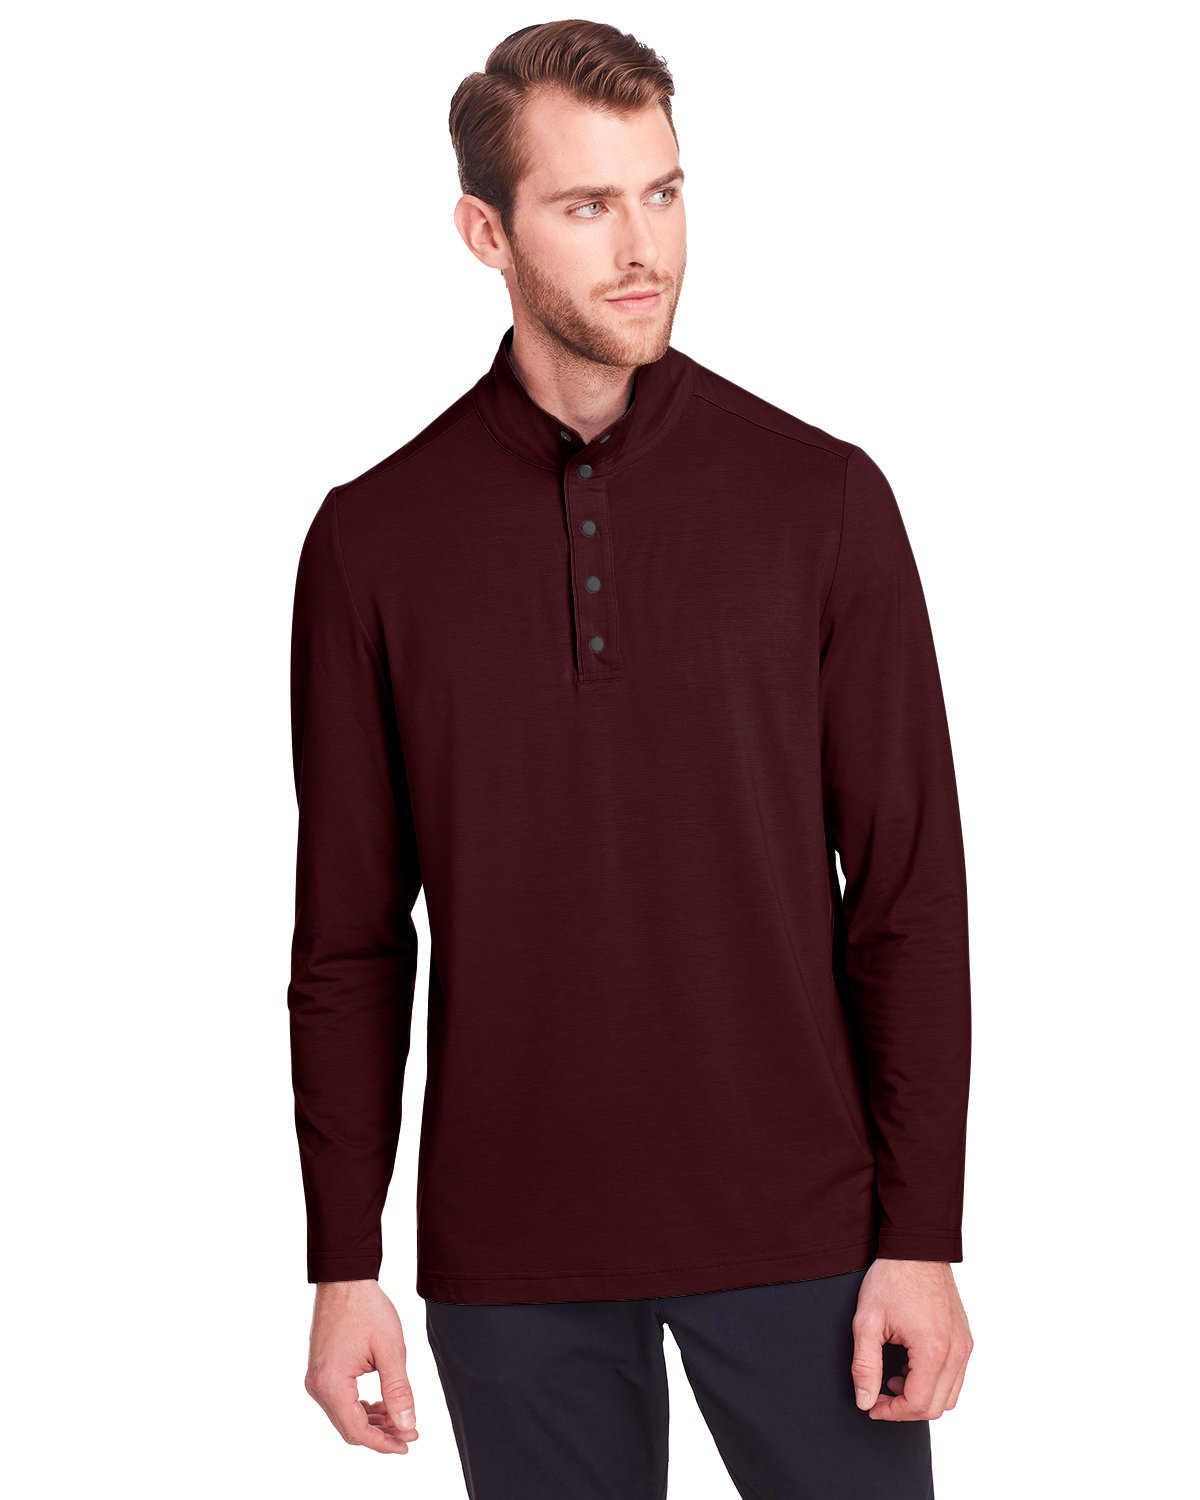 North End Men's Jaq Snap-Up Stretch Performance Pullover BURGUNDY 